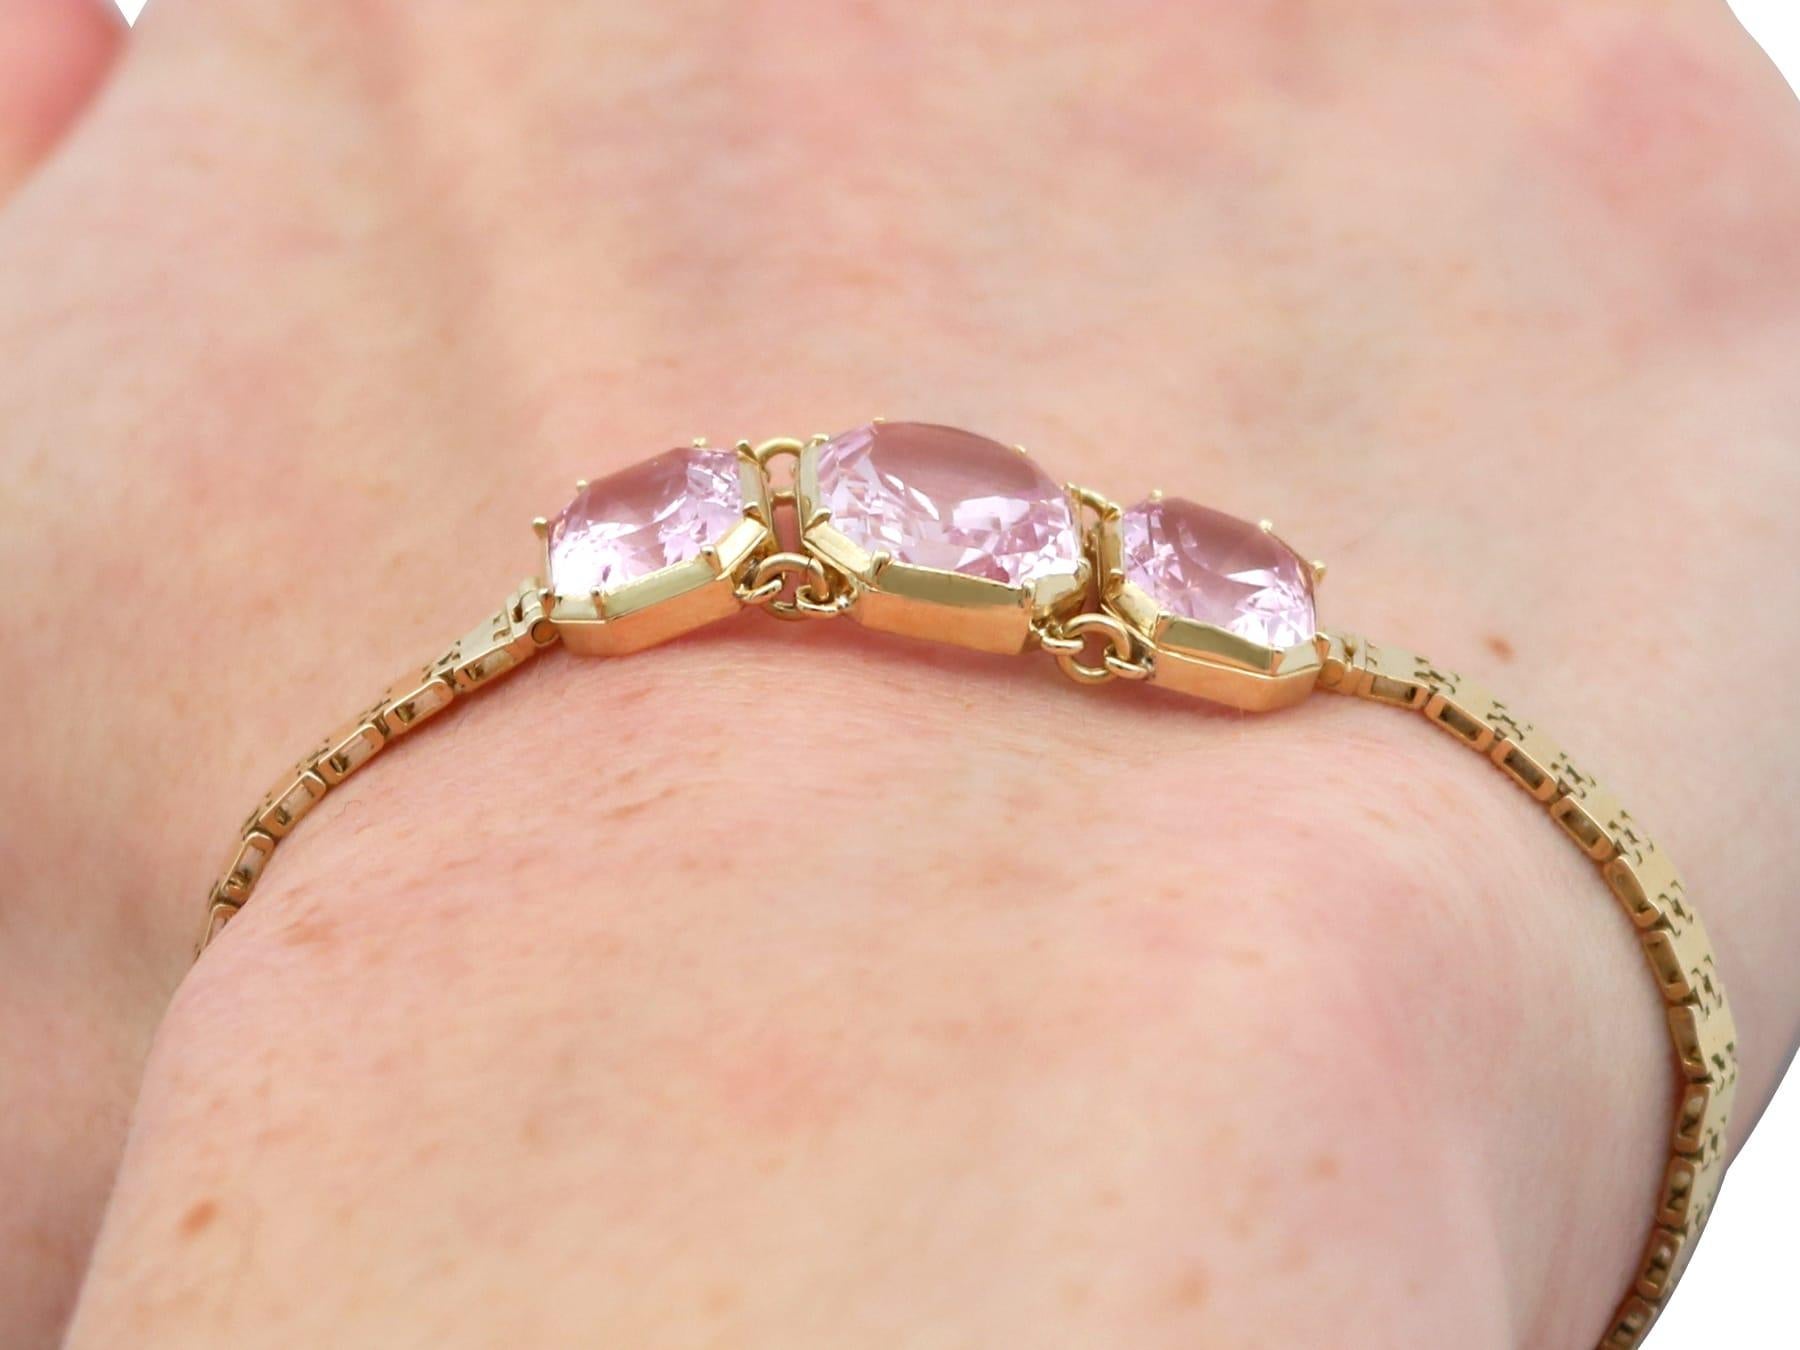 Antique 13.20Ct Pink Topaz and 18k Yellow Gold Bracelet Circa 1840 For Sale 6